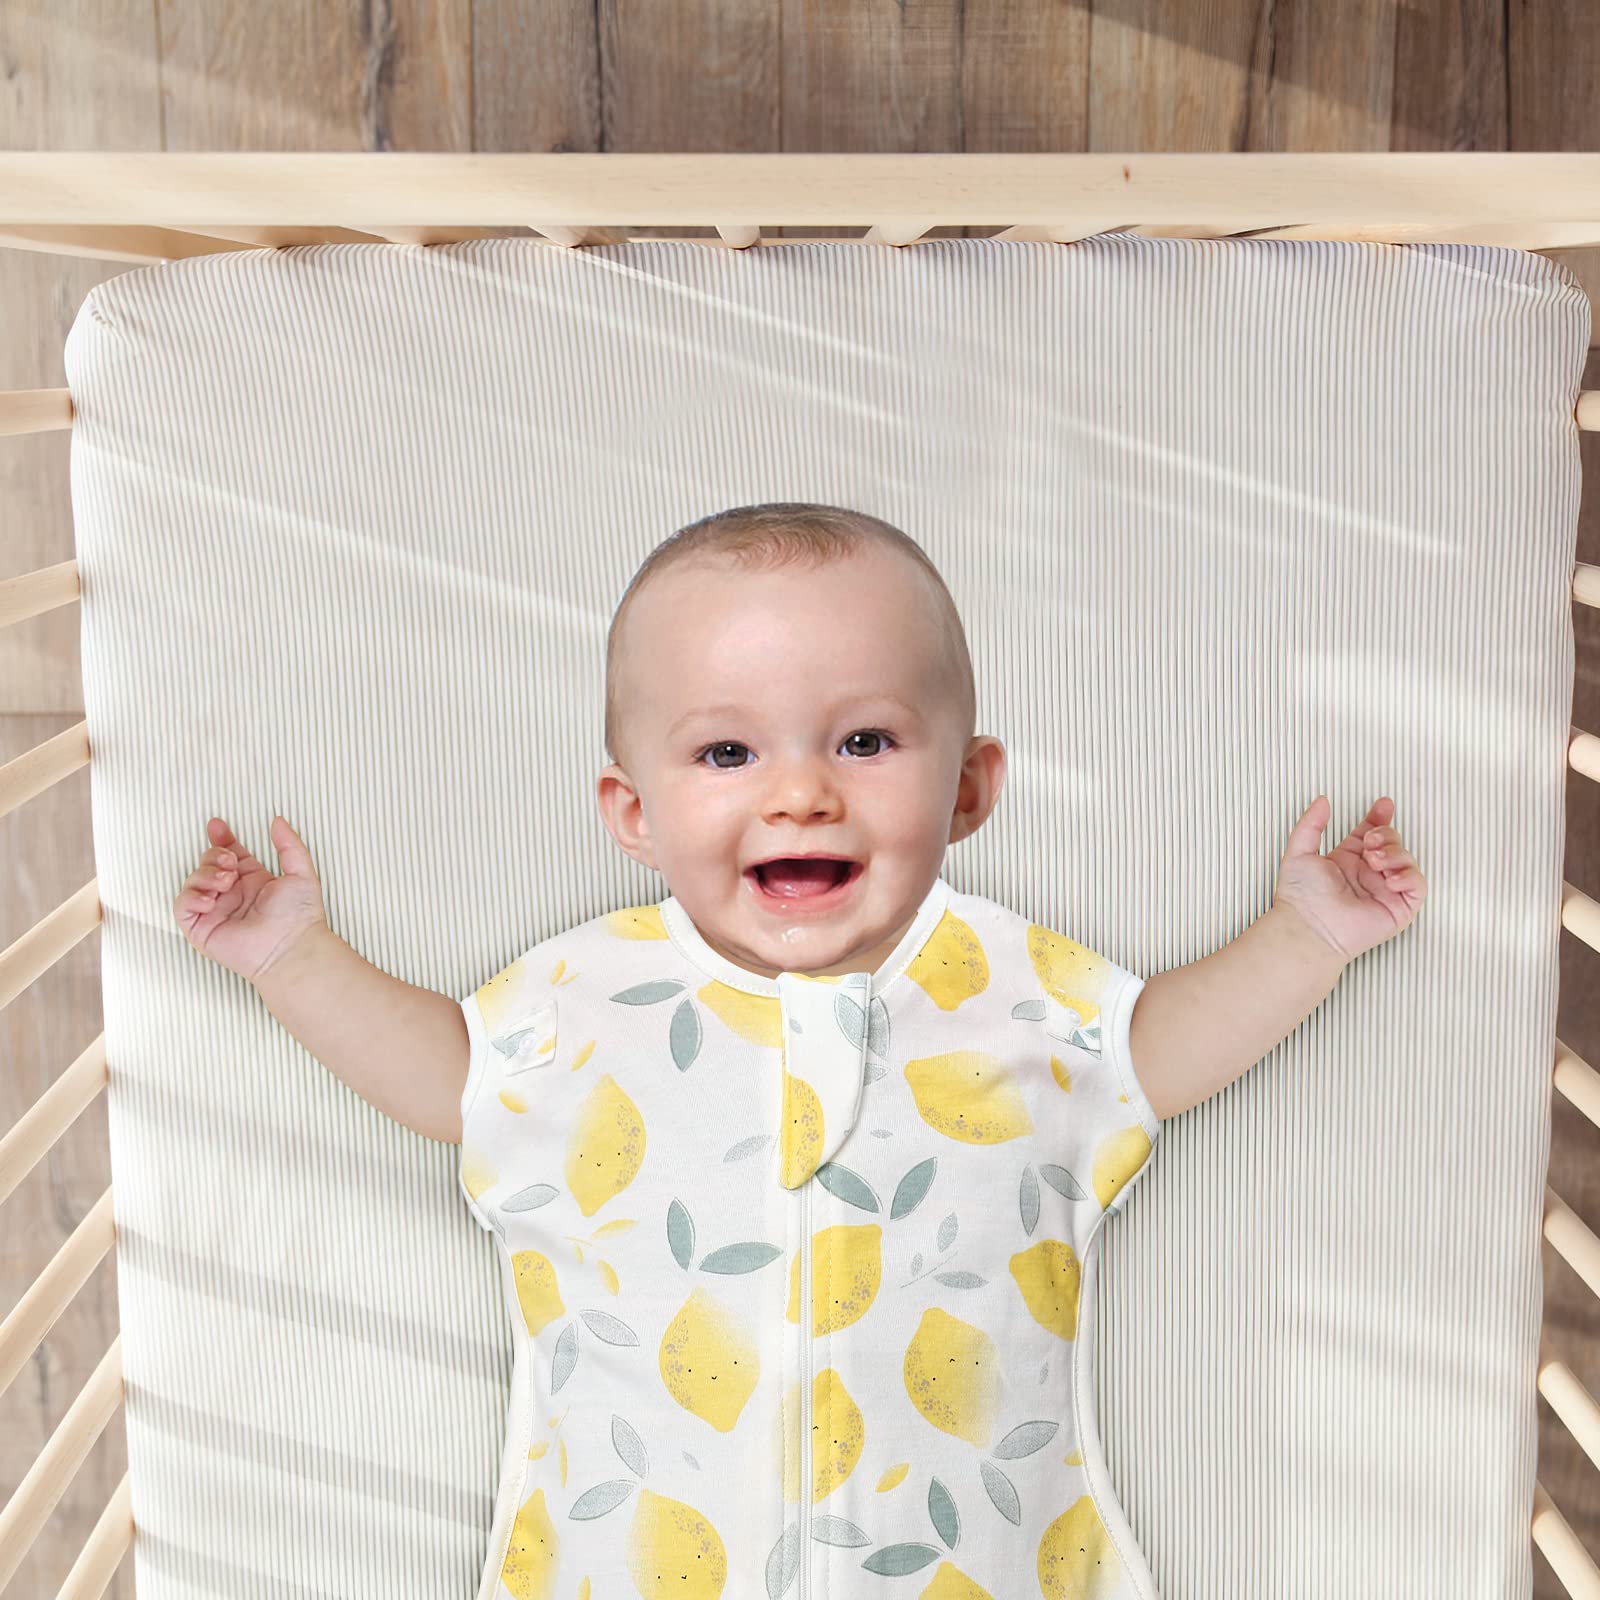 ANYEDDE Baby Swaddle Transition Bag, Baby Transition Swaddle Sleep Sack, Cuff Removable Arms Up Design, Transitions to Arms-Free Wearable Blankets with 2-Way Zipper, Smile & Lemon (3-6 Month)